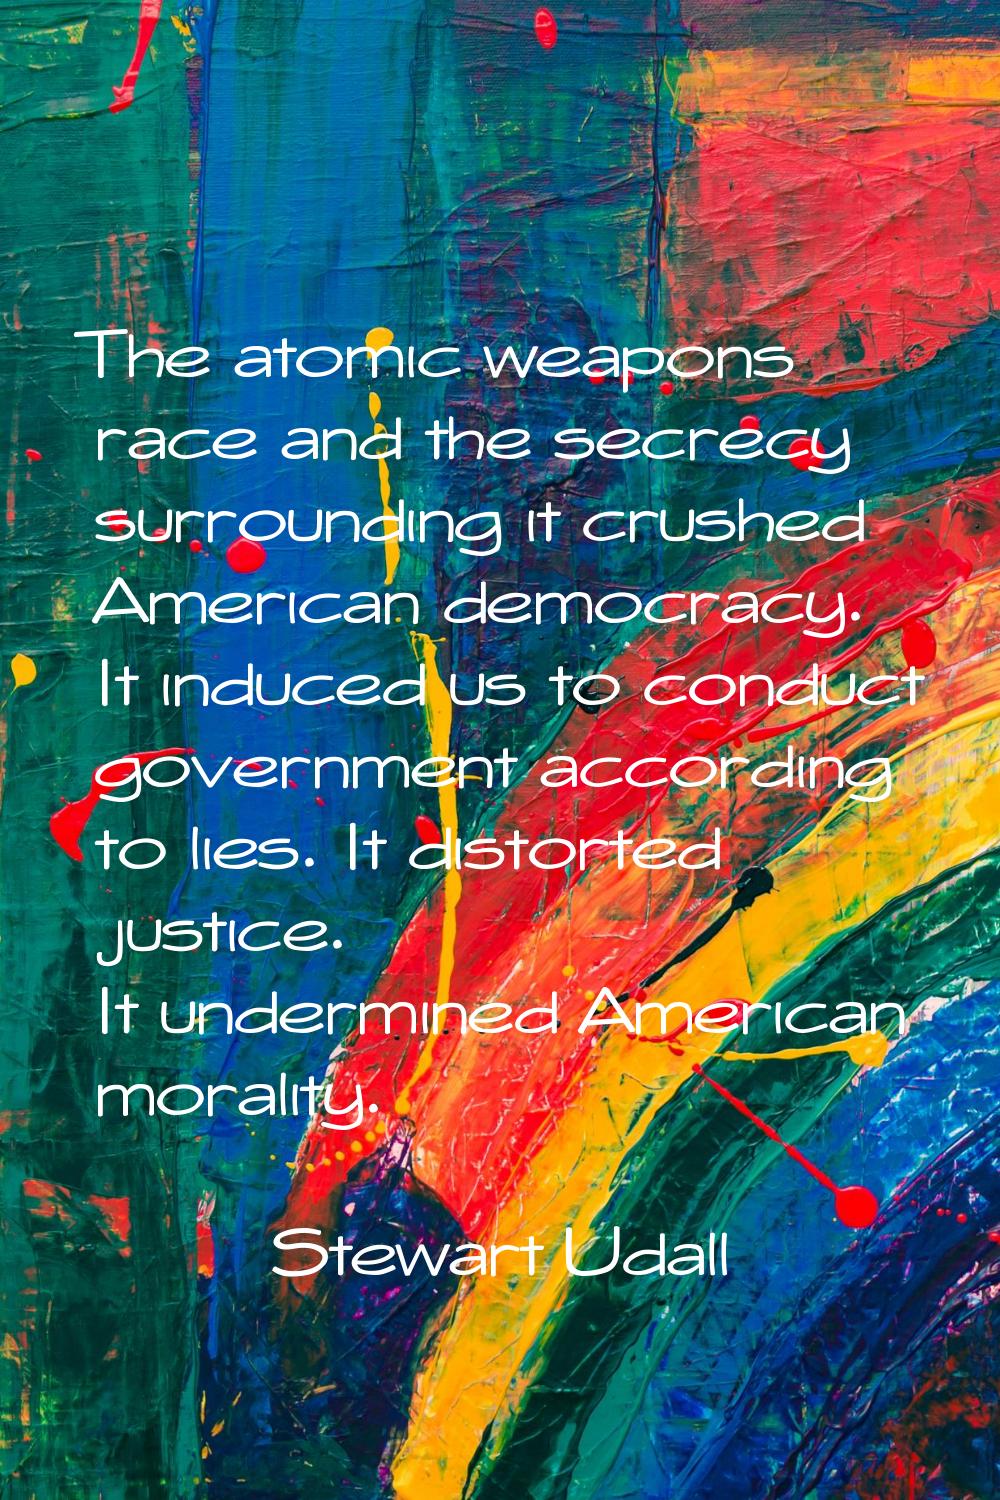 The atomic weapons race and the secrecy surrounding it crushed American democracy. It induced us to